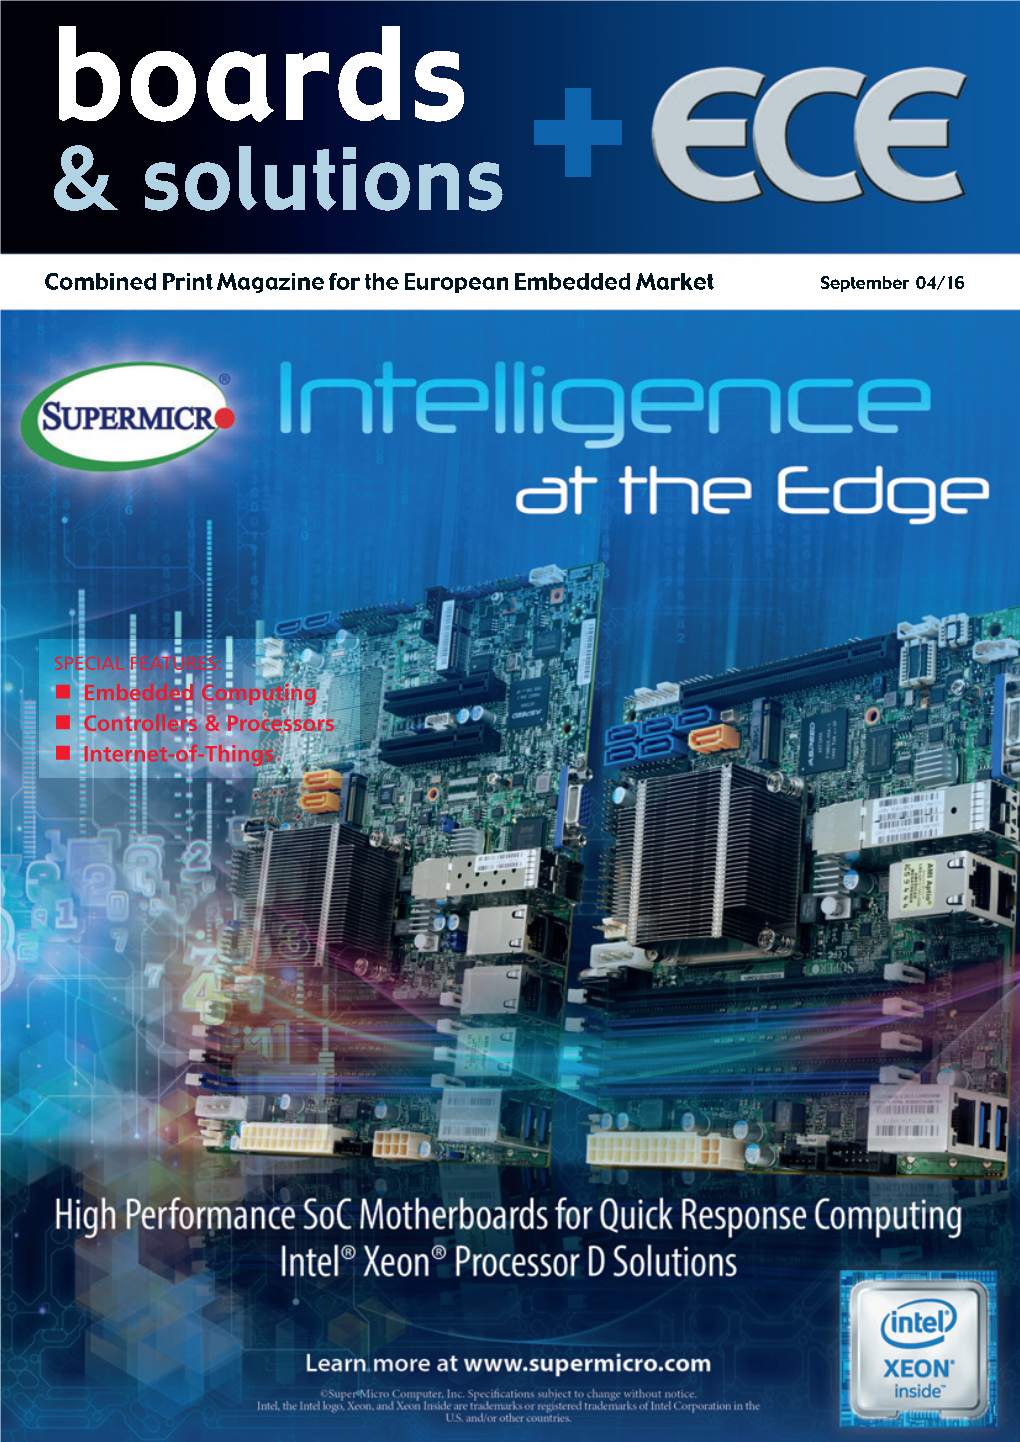 Embedded Computing Controllers & Processors Internet-Of-Things